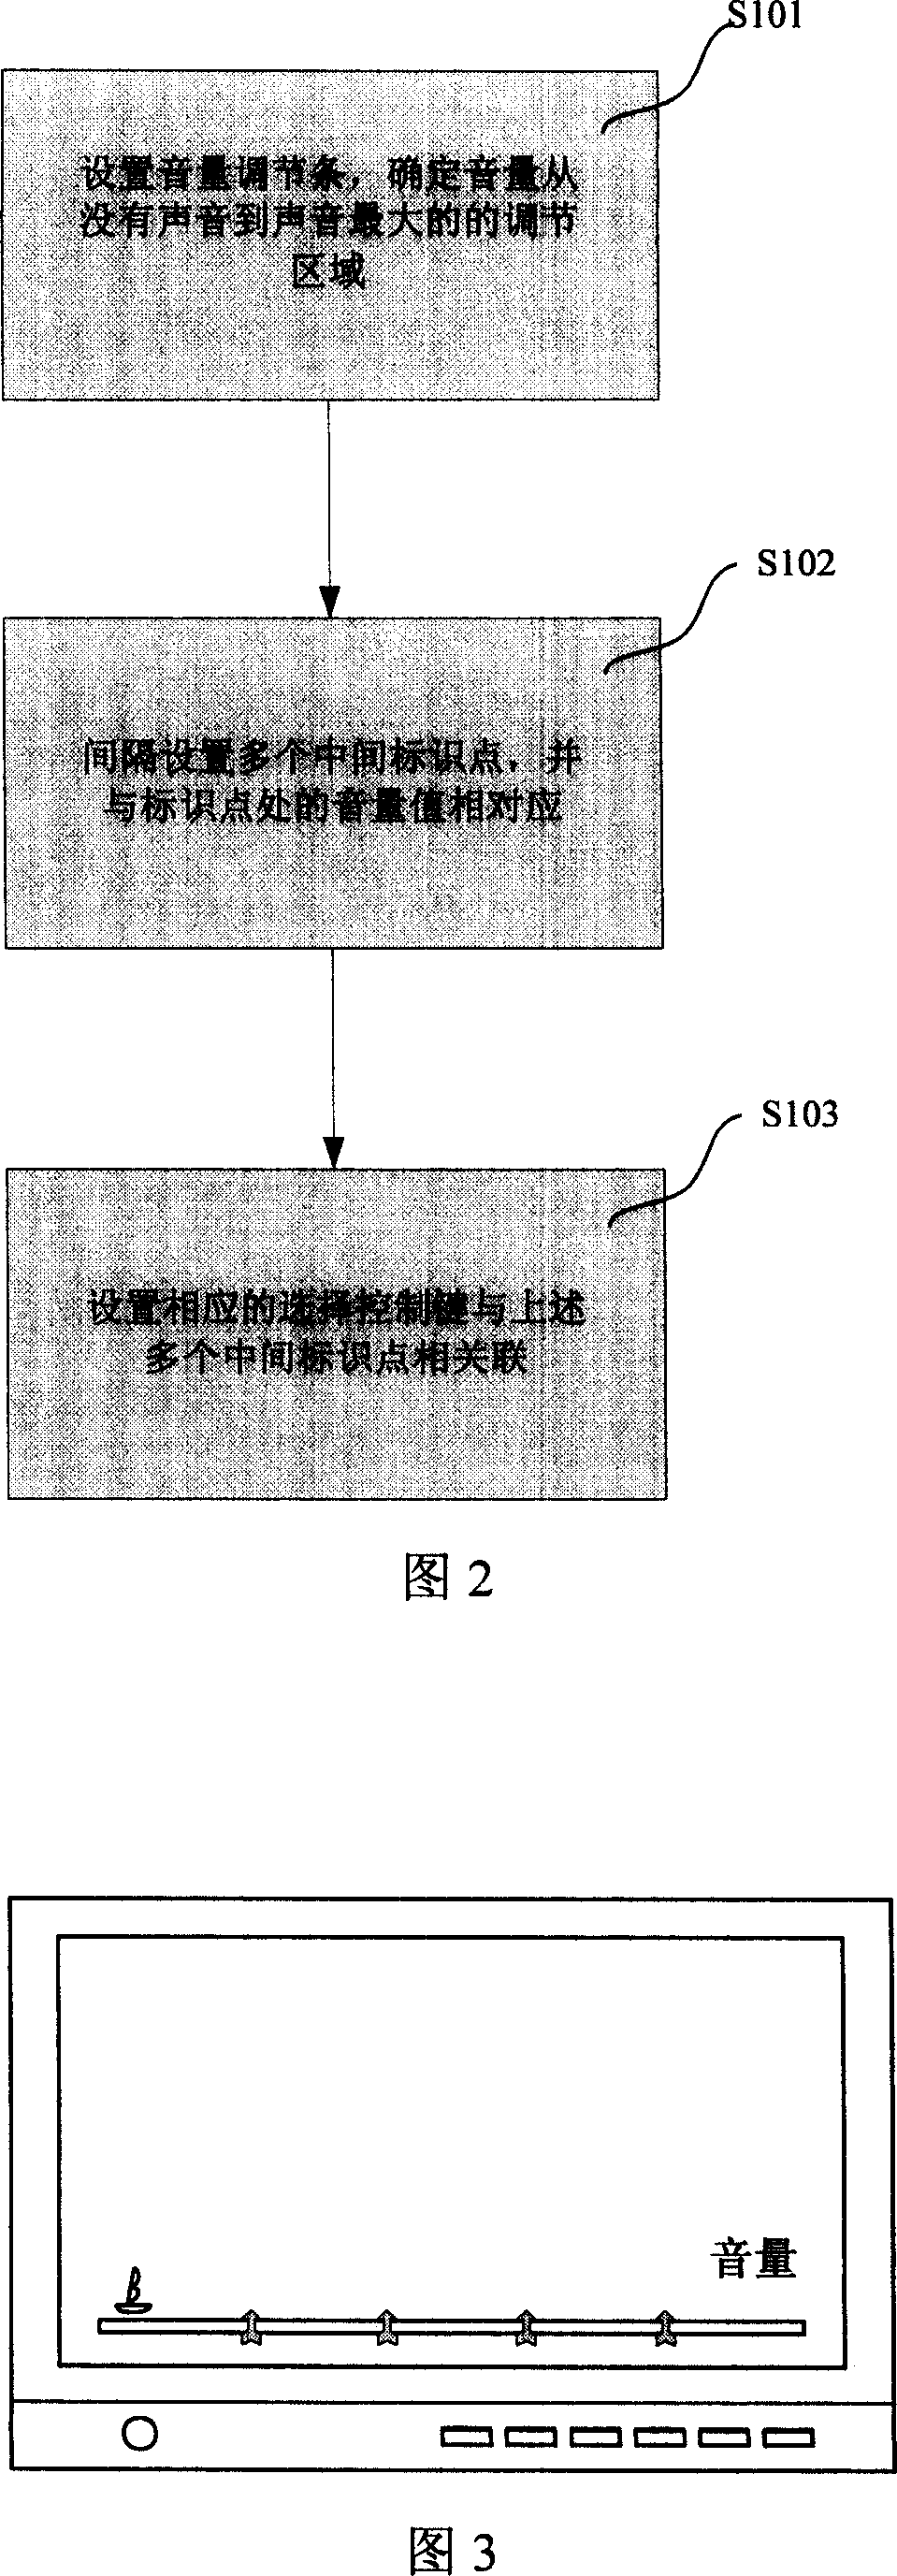 Multimedia device volume control method and system